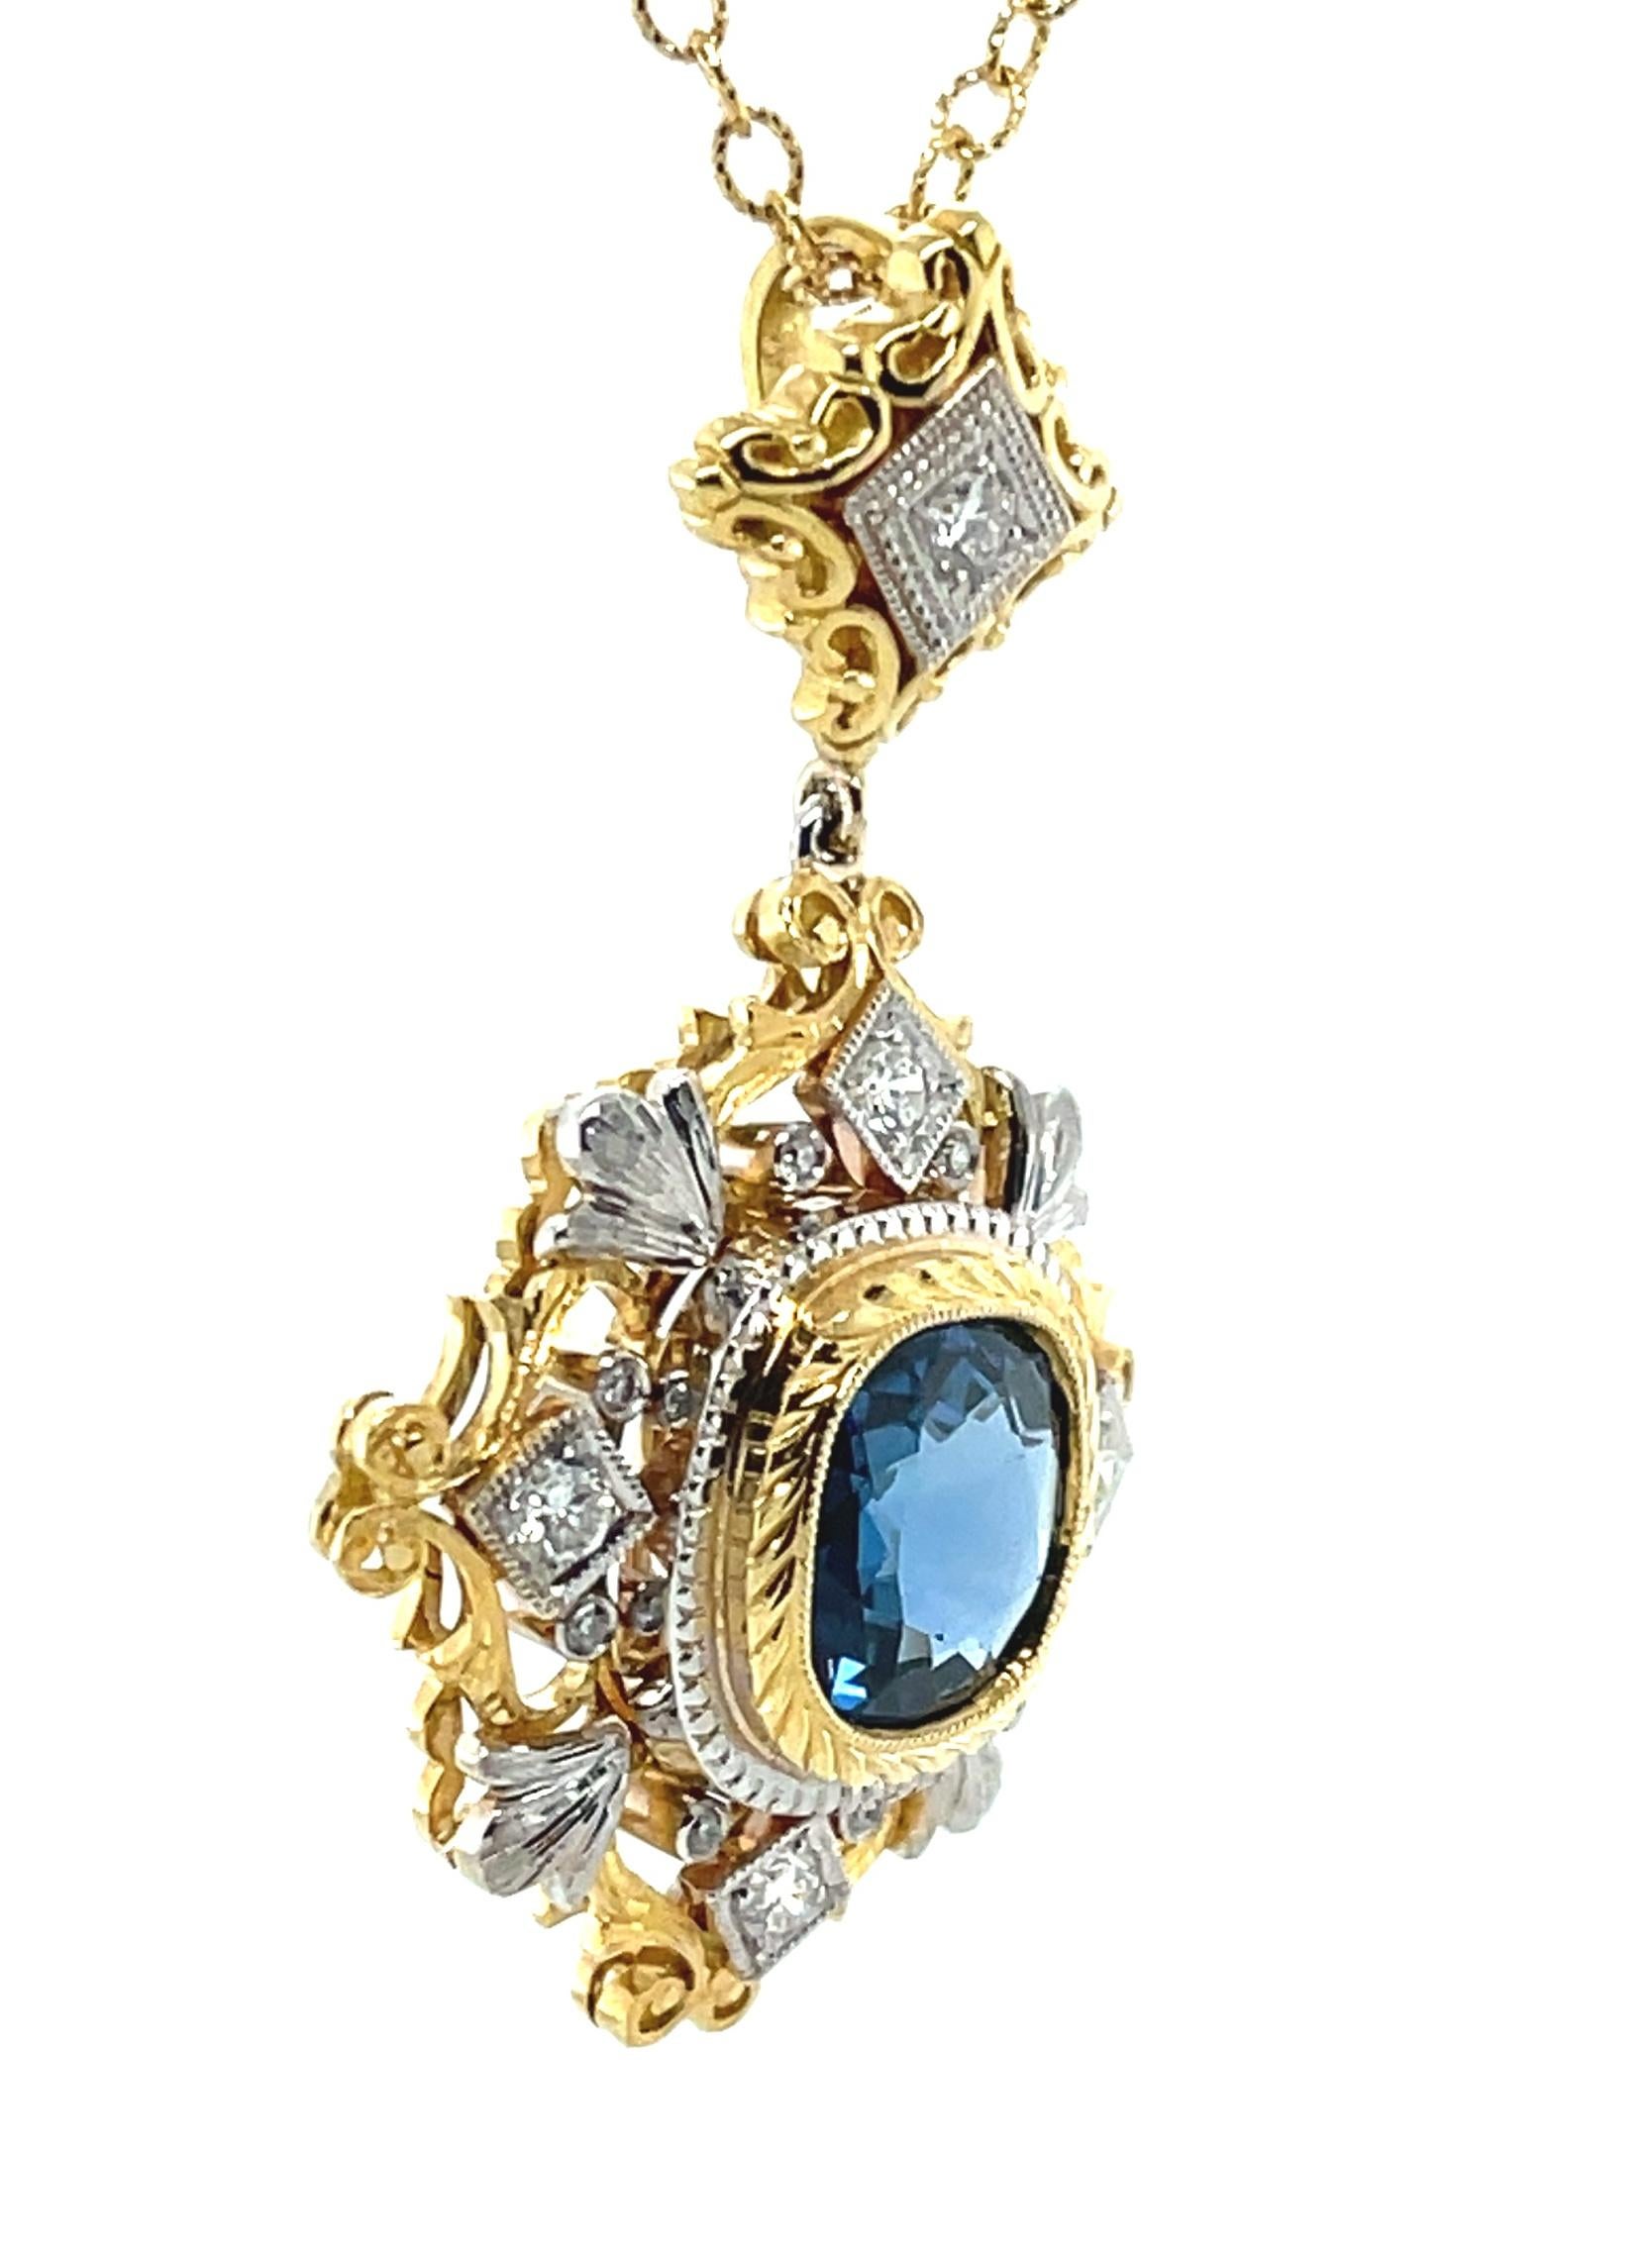 Artisan 3.38 Carat Sapphire and Diamond Handmade Necklace in 18k White and Yellow Gold  For Sale